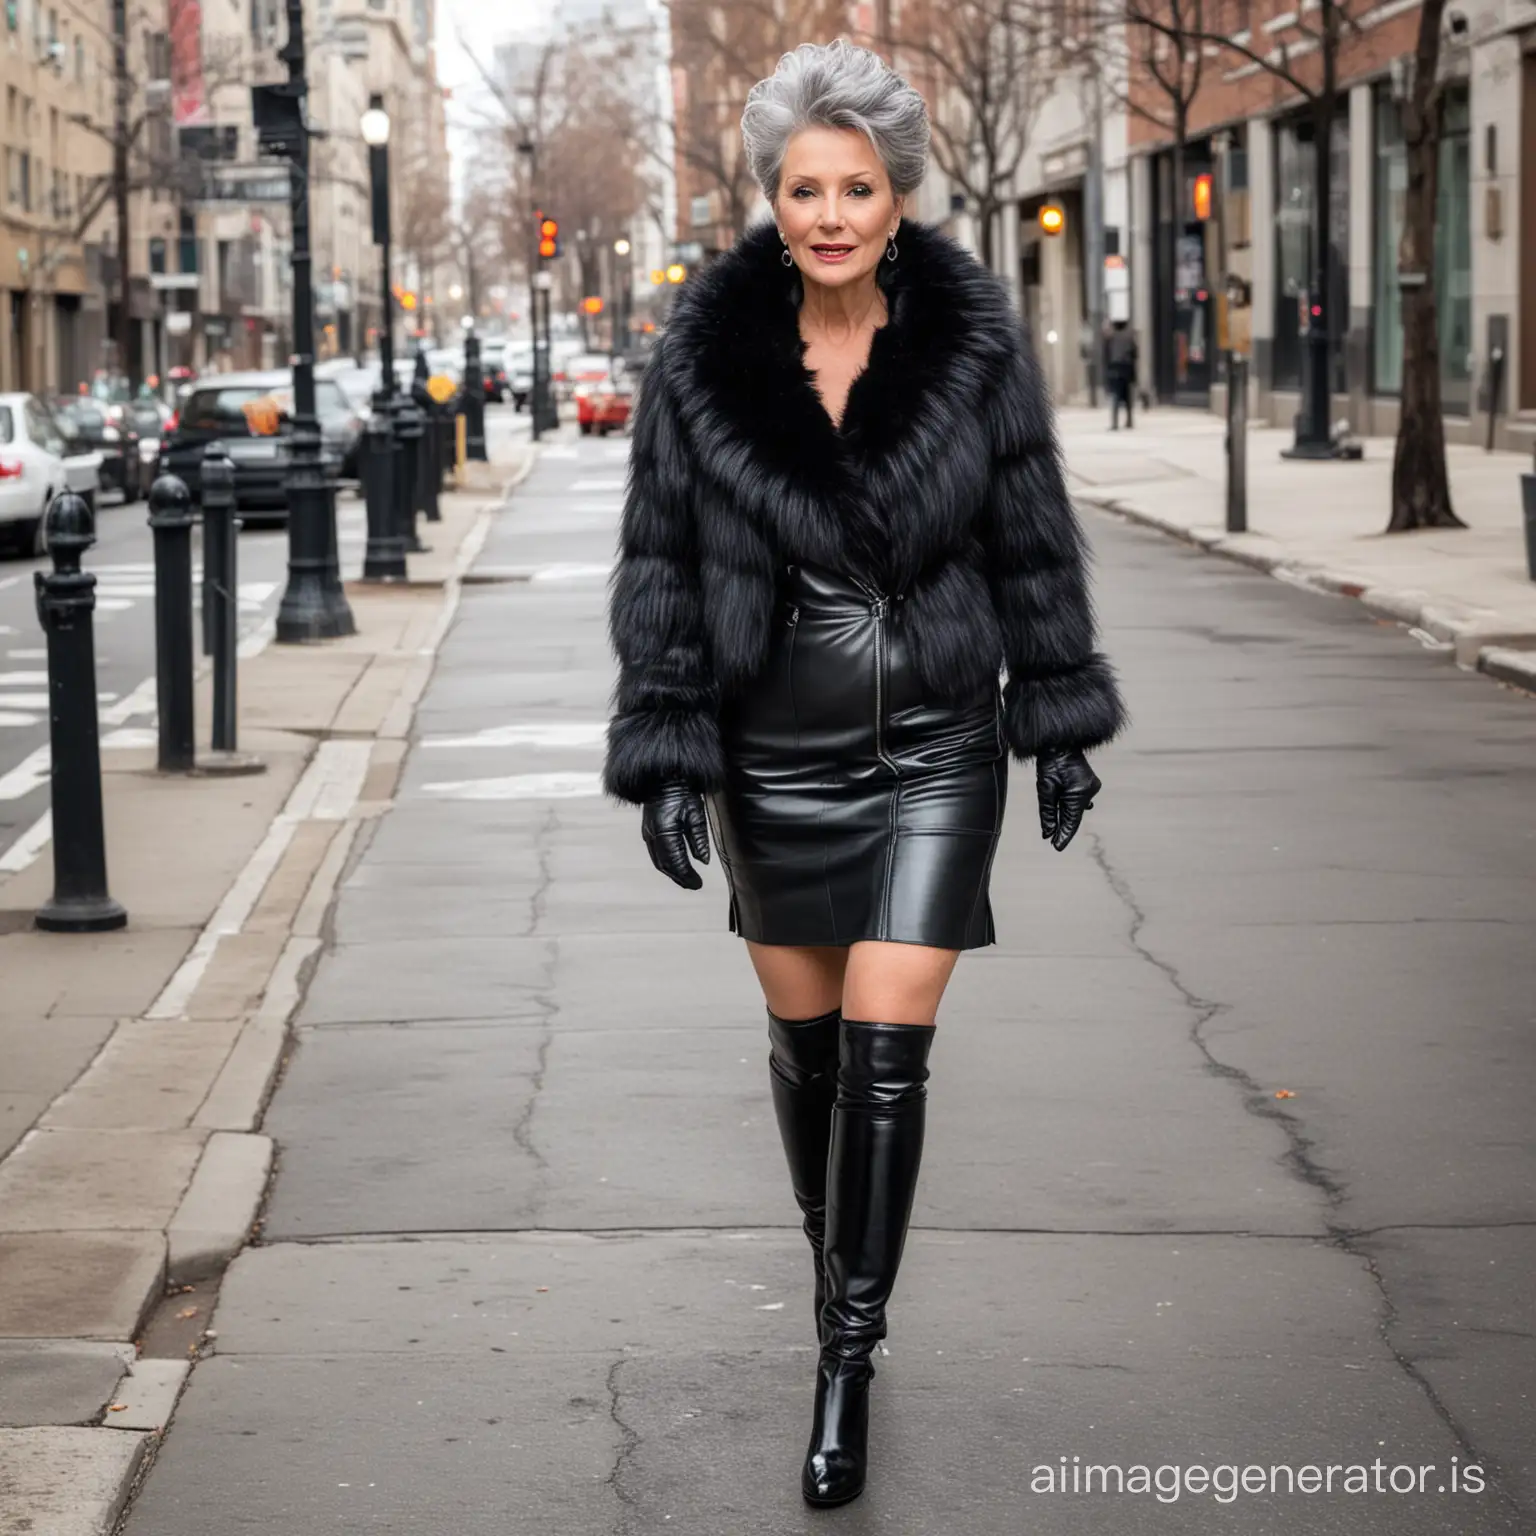  gray bouffant haired mature woman wearing a fur coat, black leather gloves, black leather mini skirt and knee high black patent leather high heeled boots walking on a sidewalk in the city